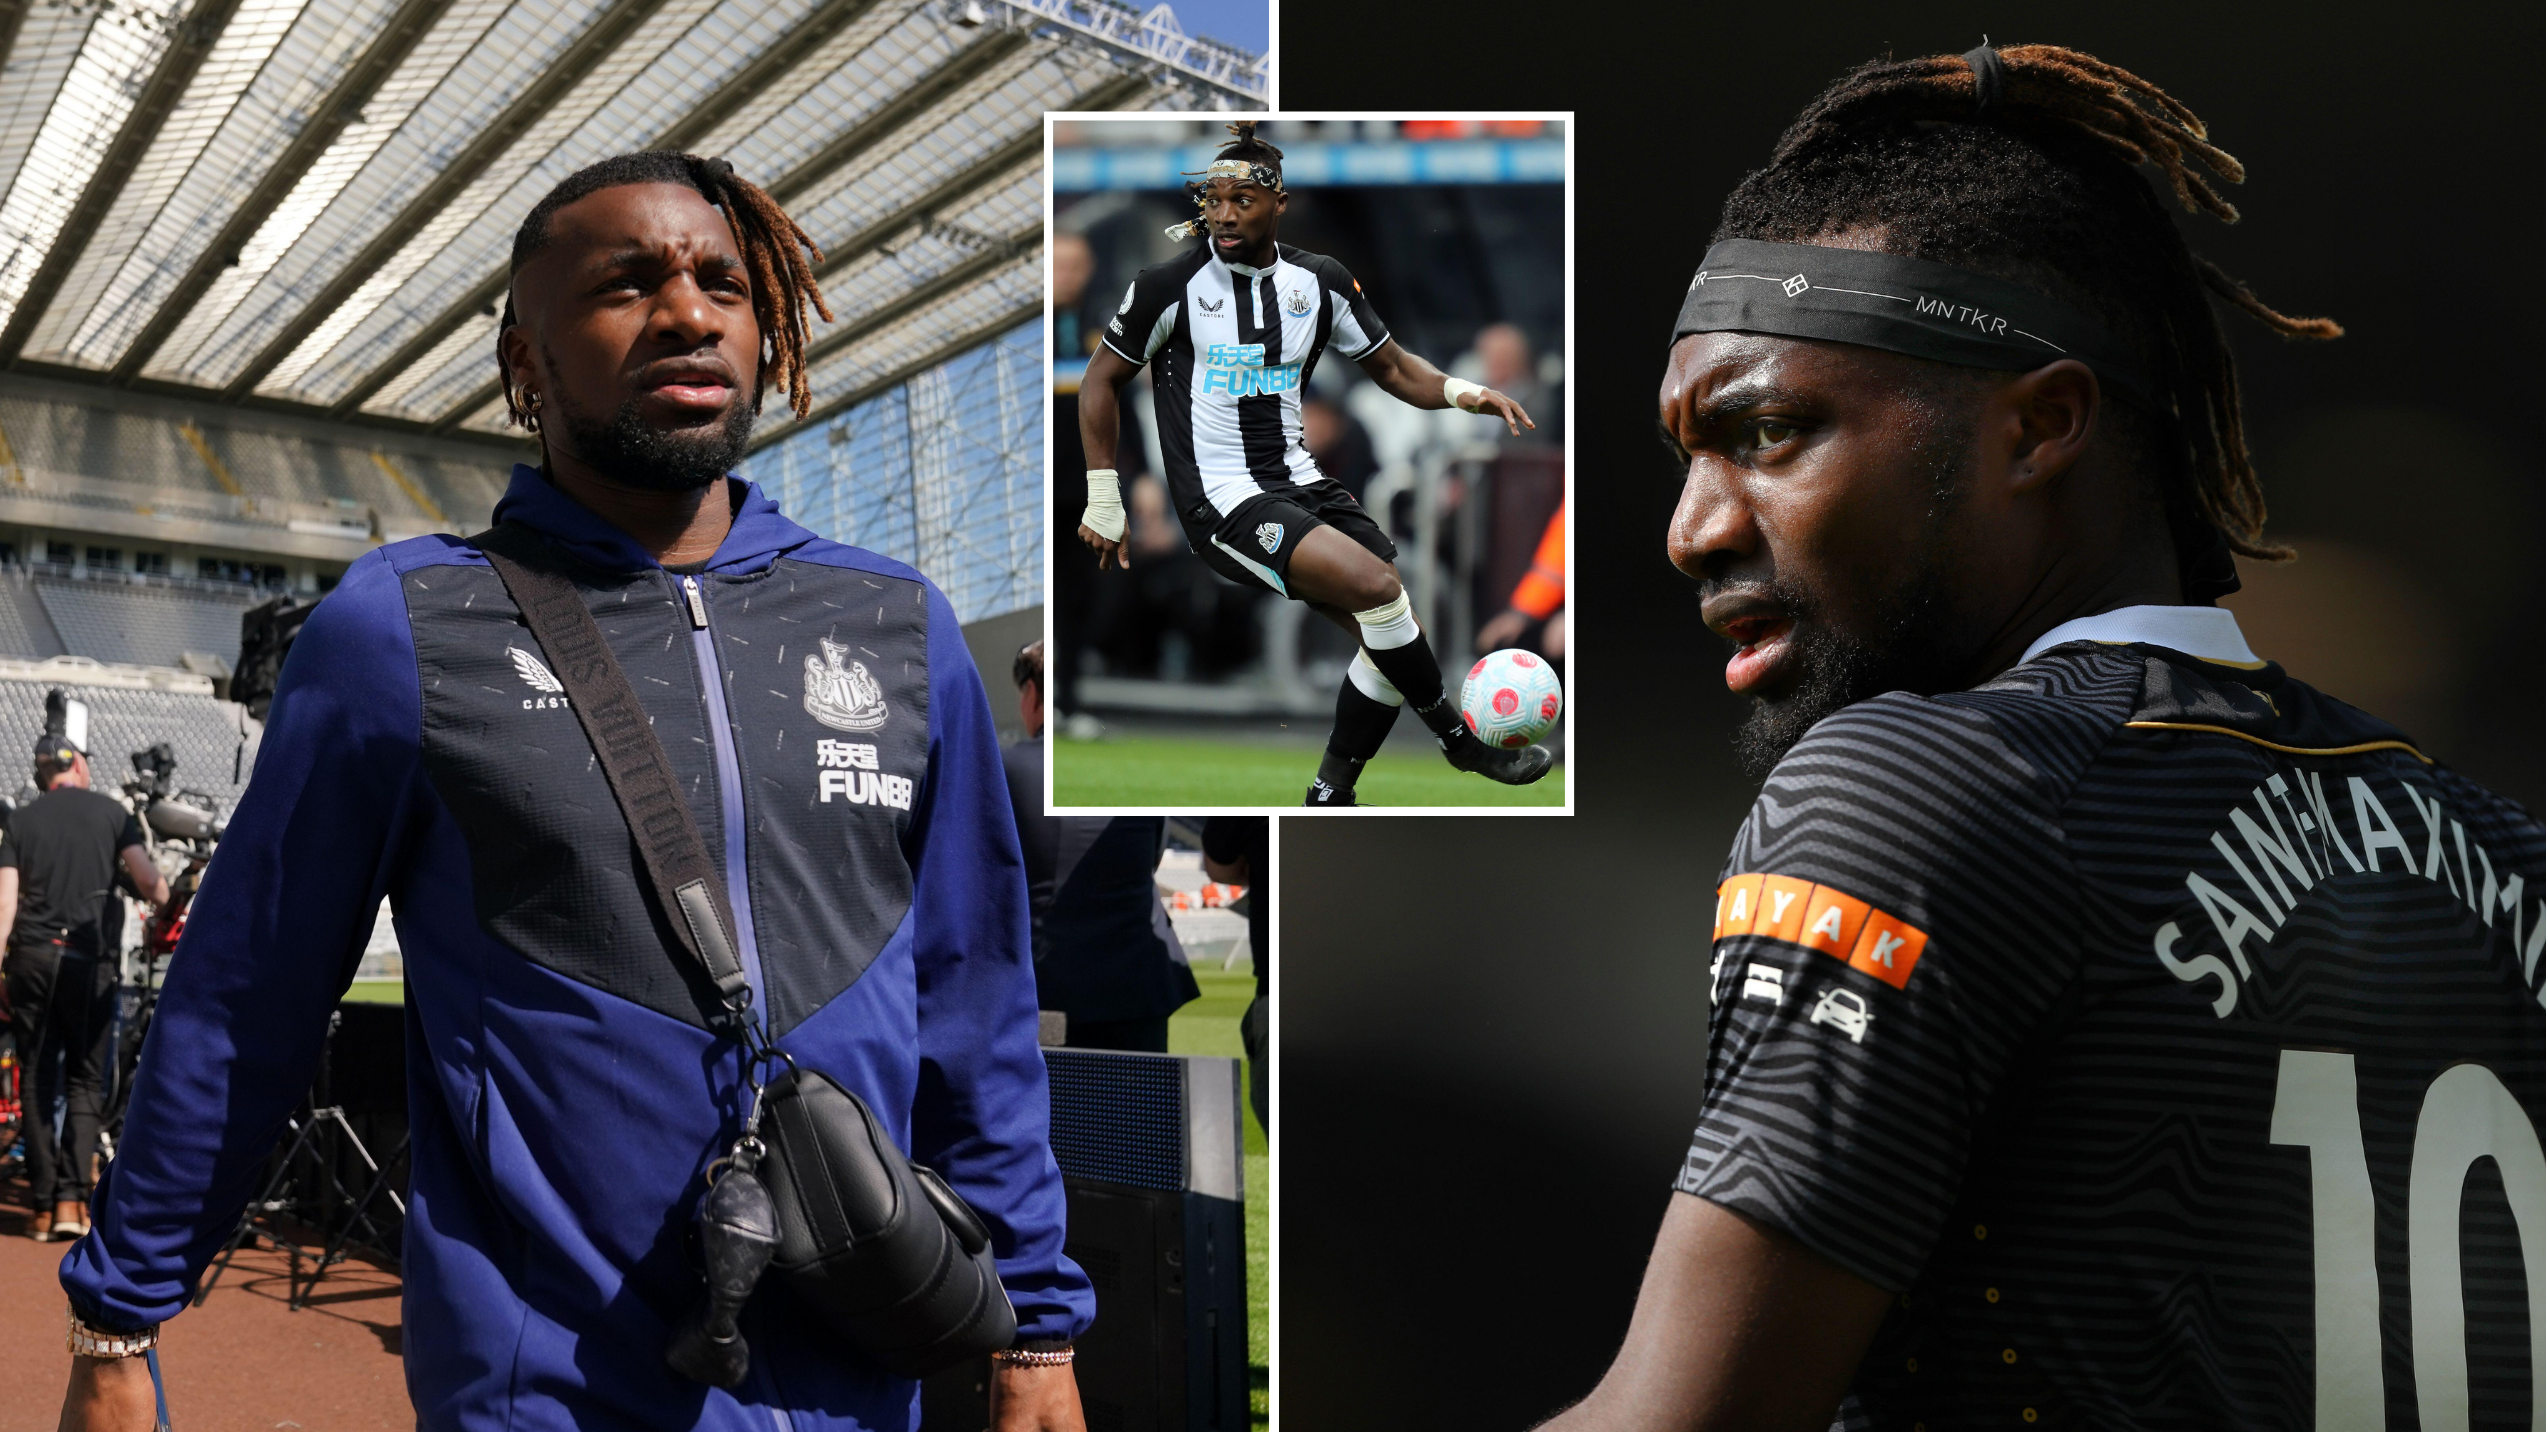 Allan Saint-Maximin Charged By FA For Wearing Designer Headbands